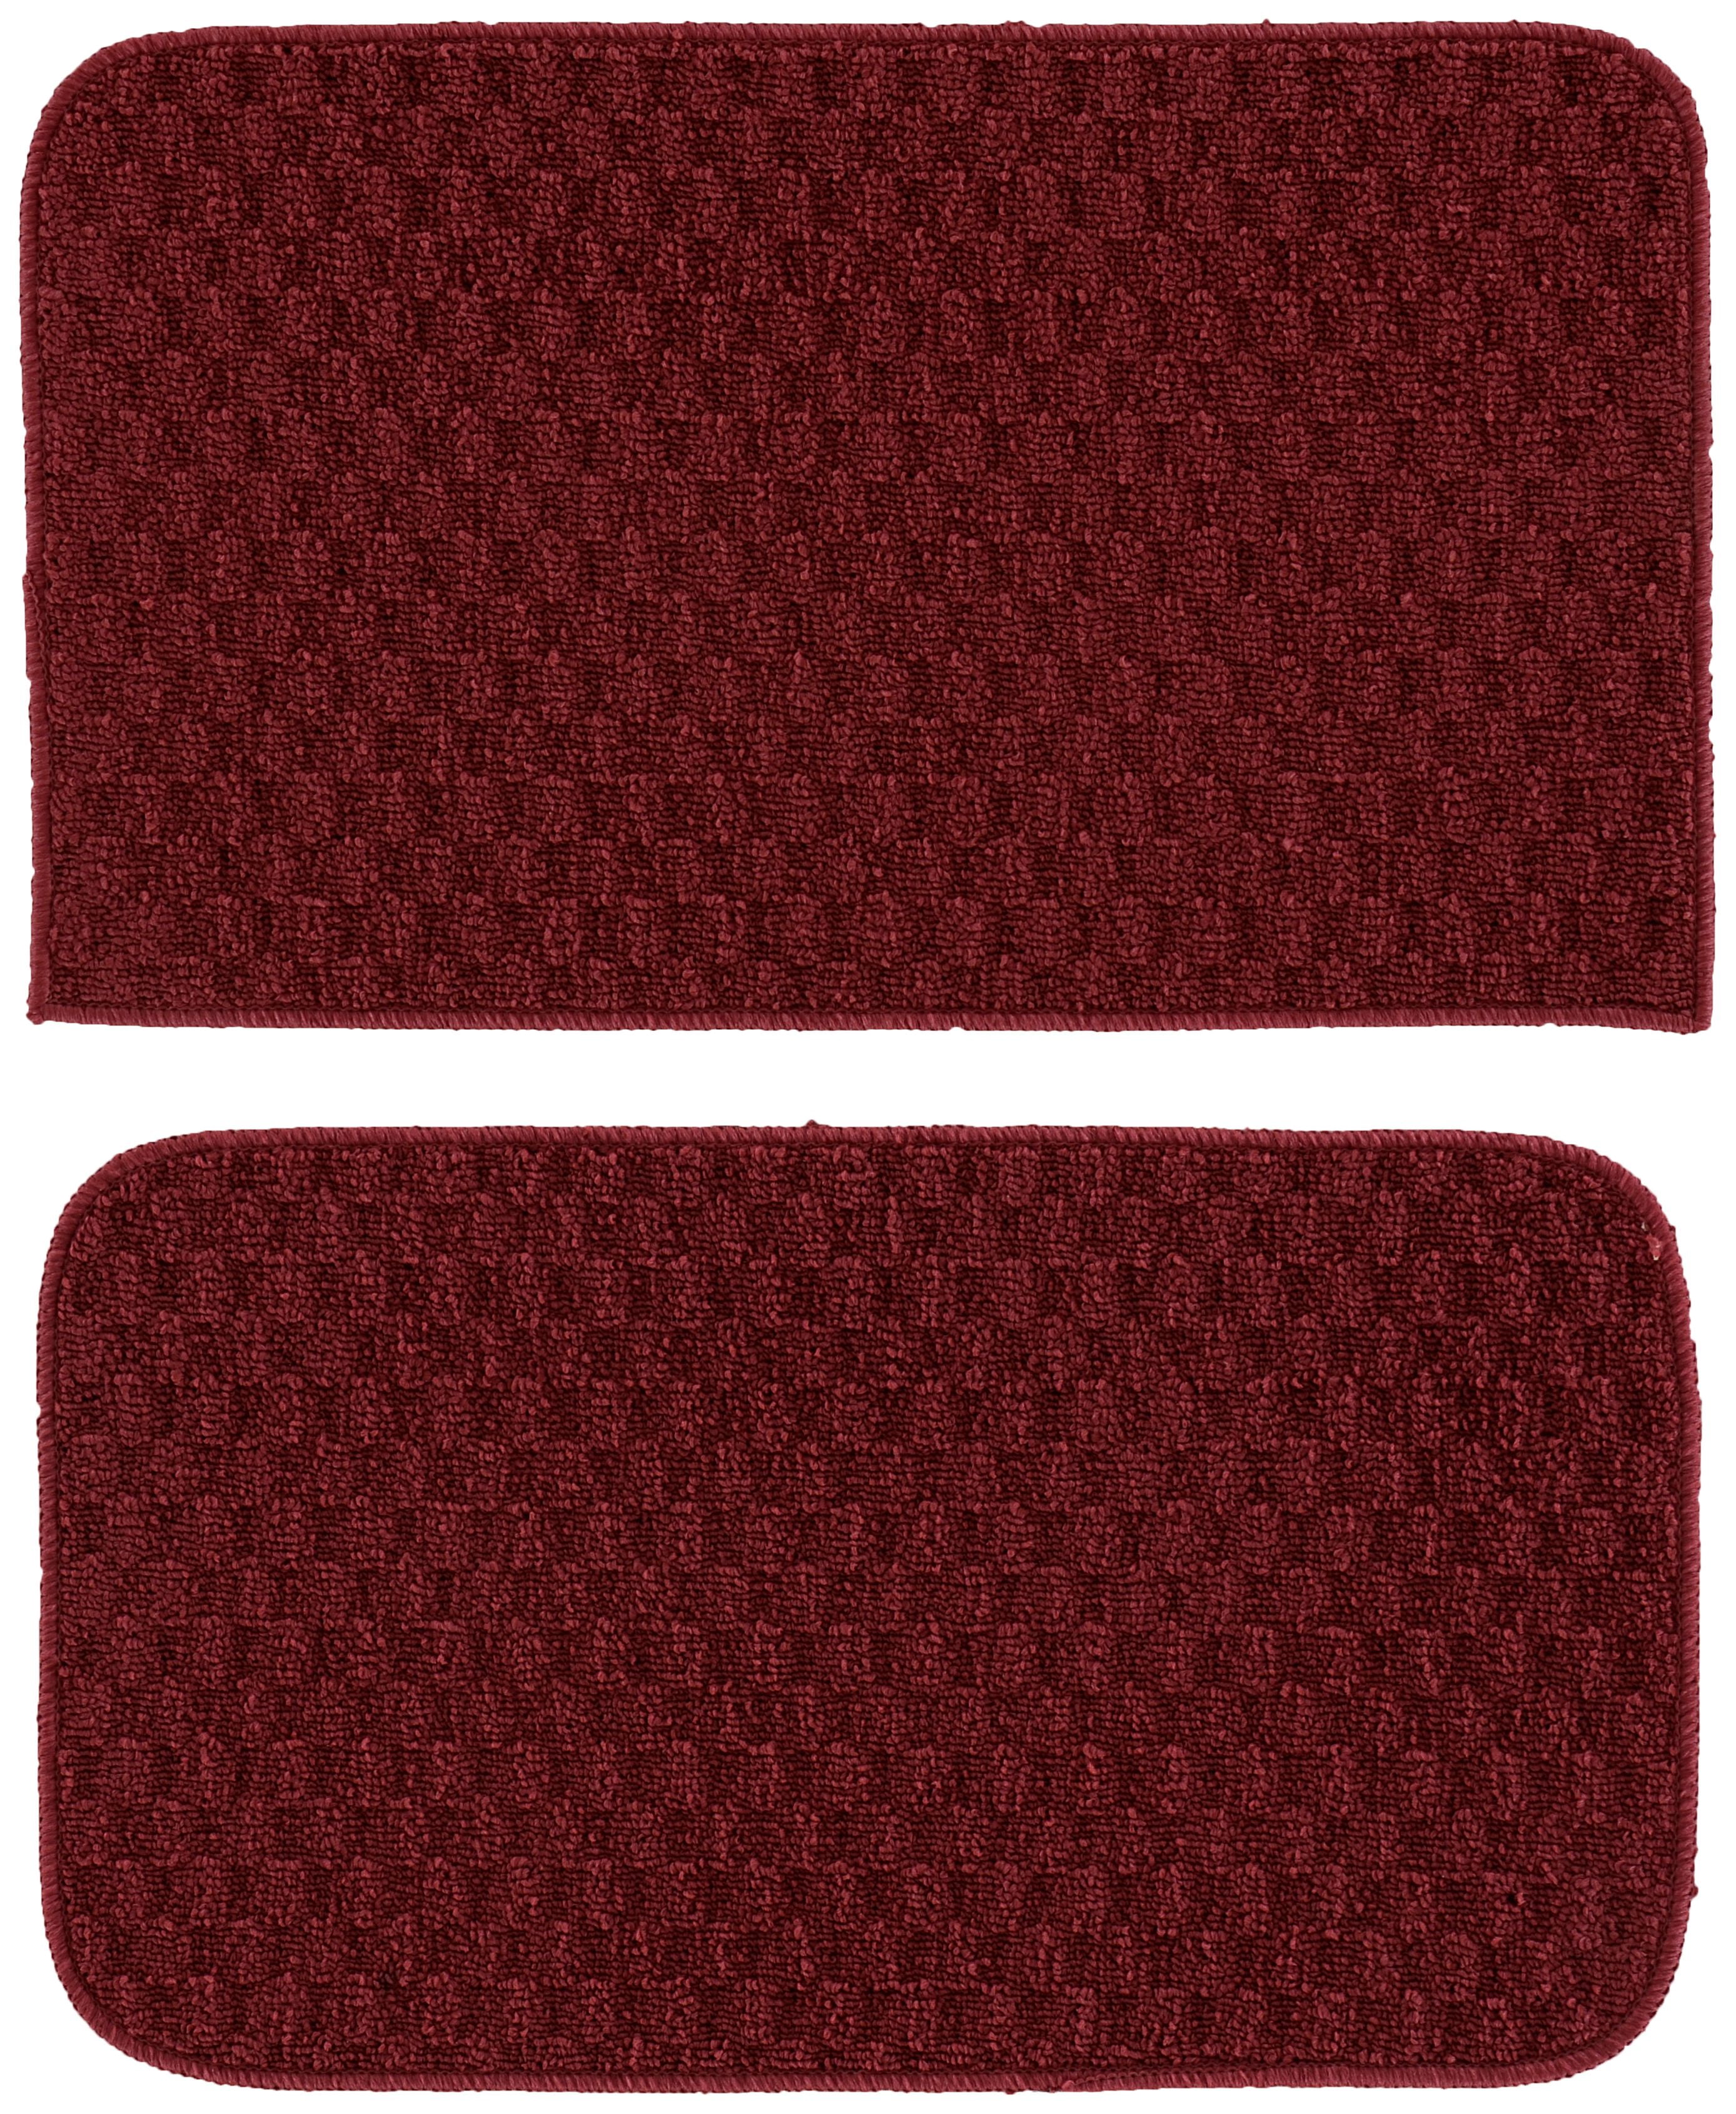 Garland Rugs Berber Coloriations 2 piece Kitchen Rug Set 24 inches